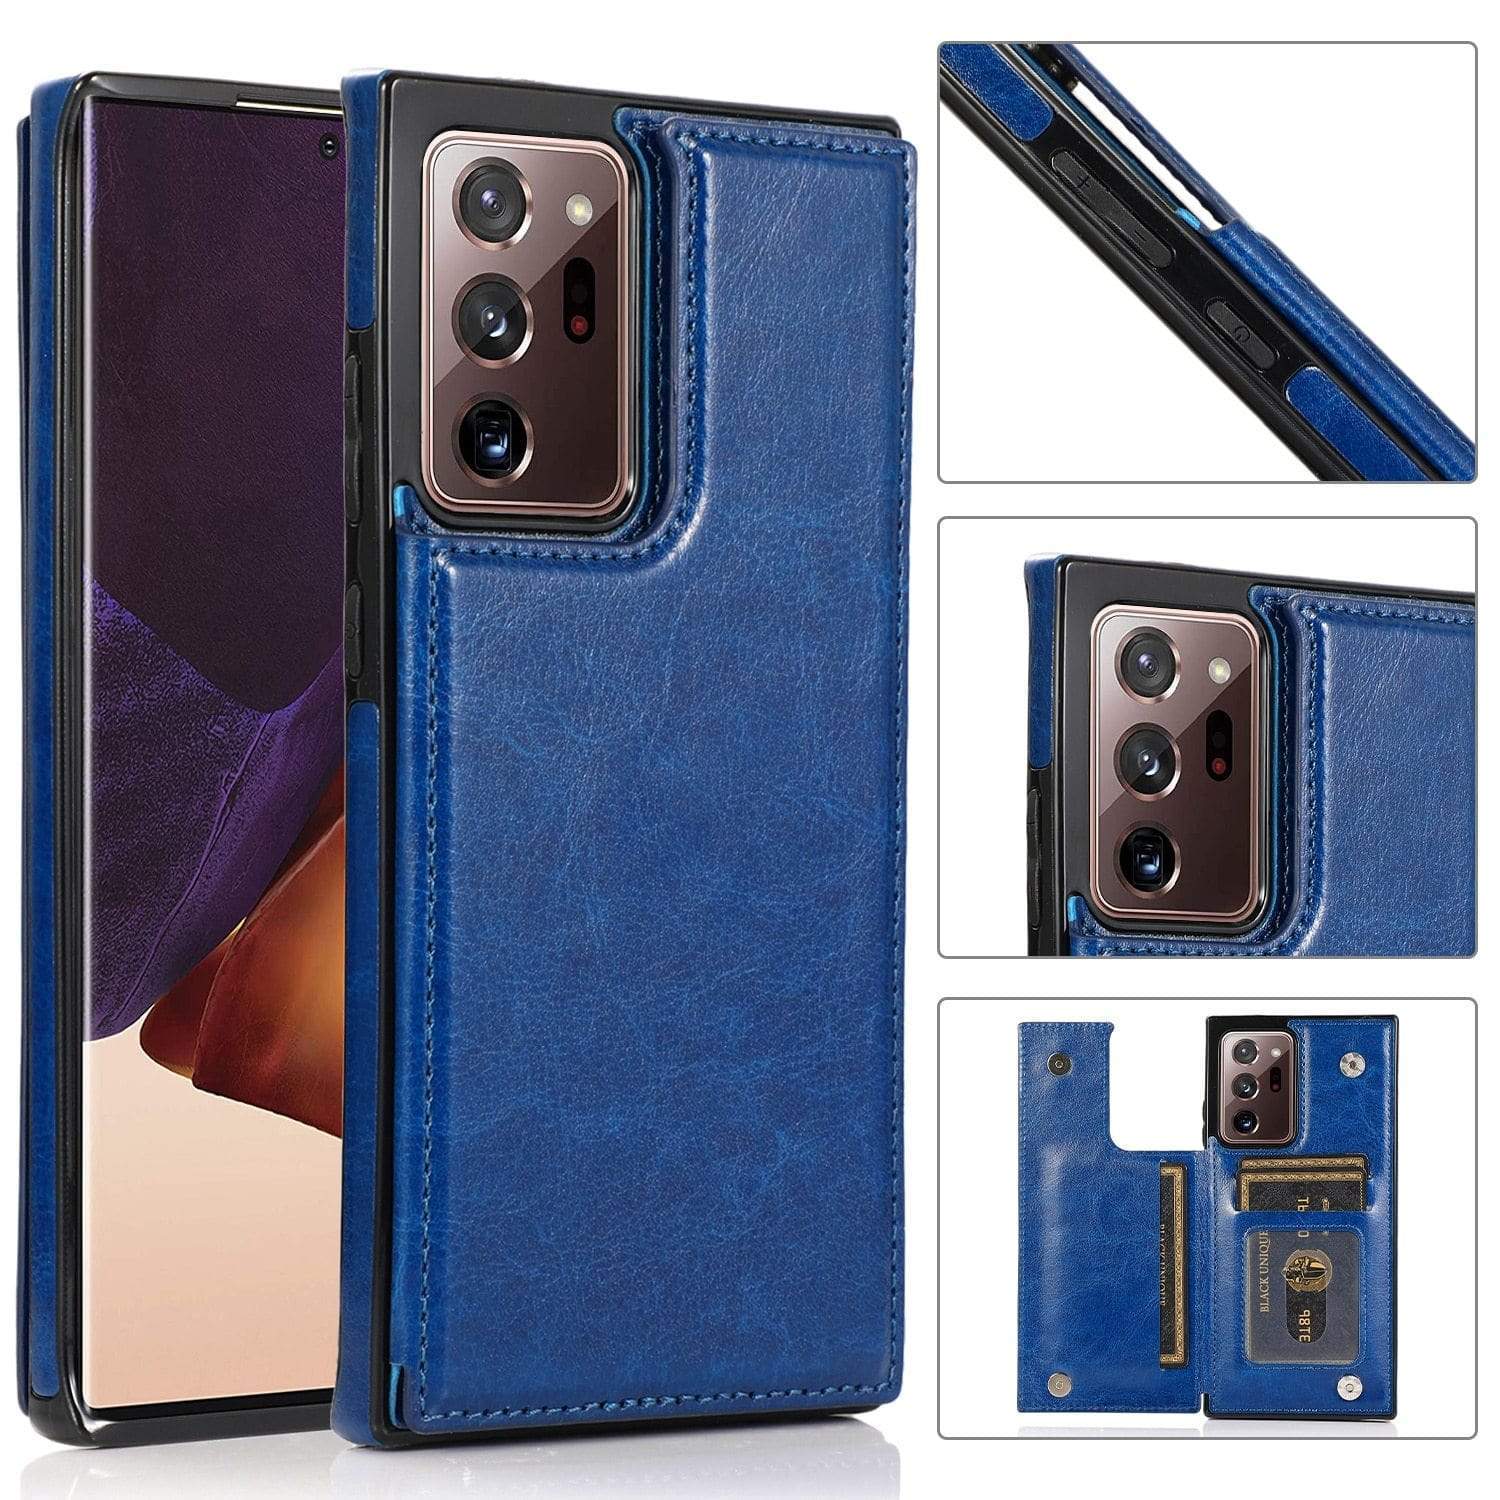 Cardholder Case For Samsung Galaxy S20 FE/Note 20 Leather Cardholder Samsung Cases Styleeo